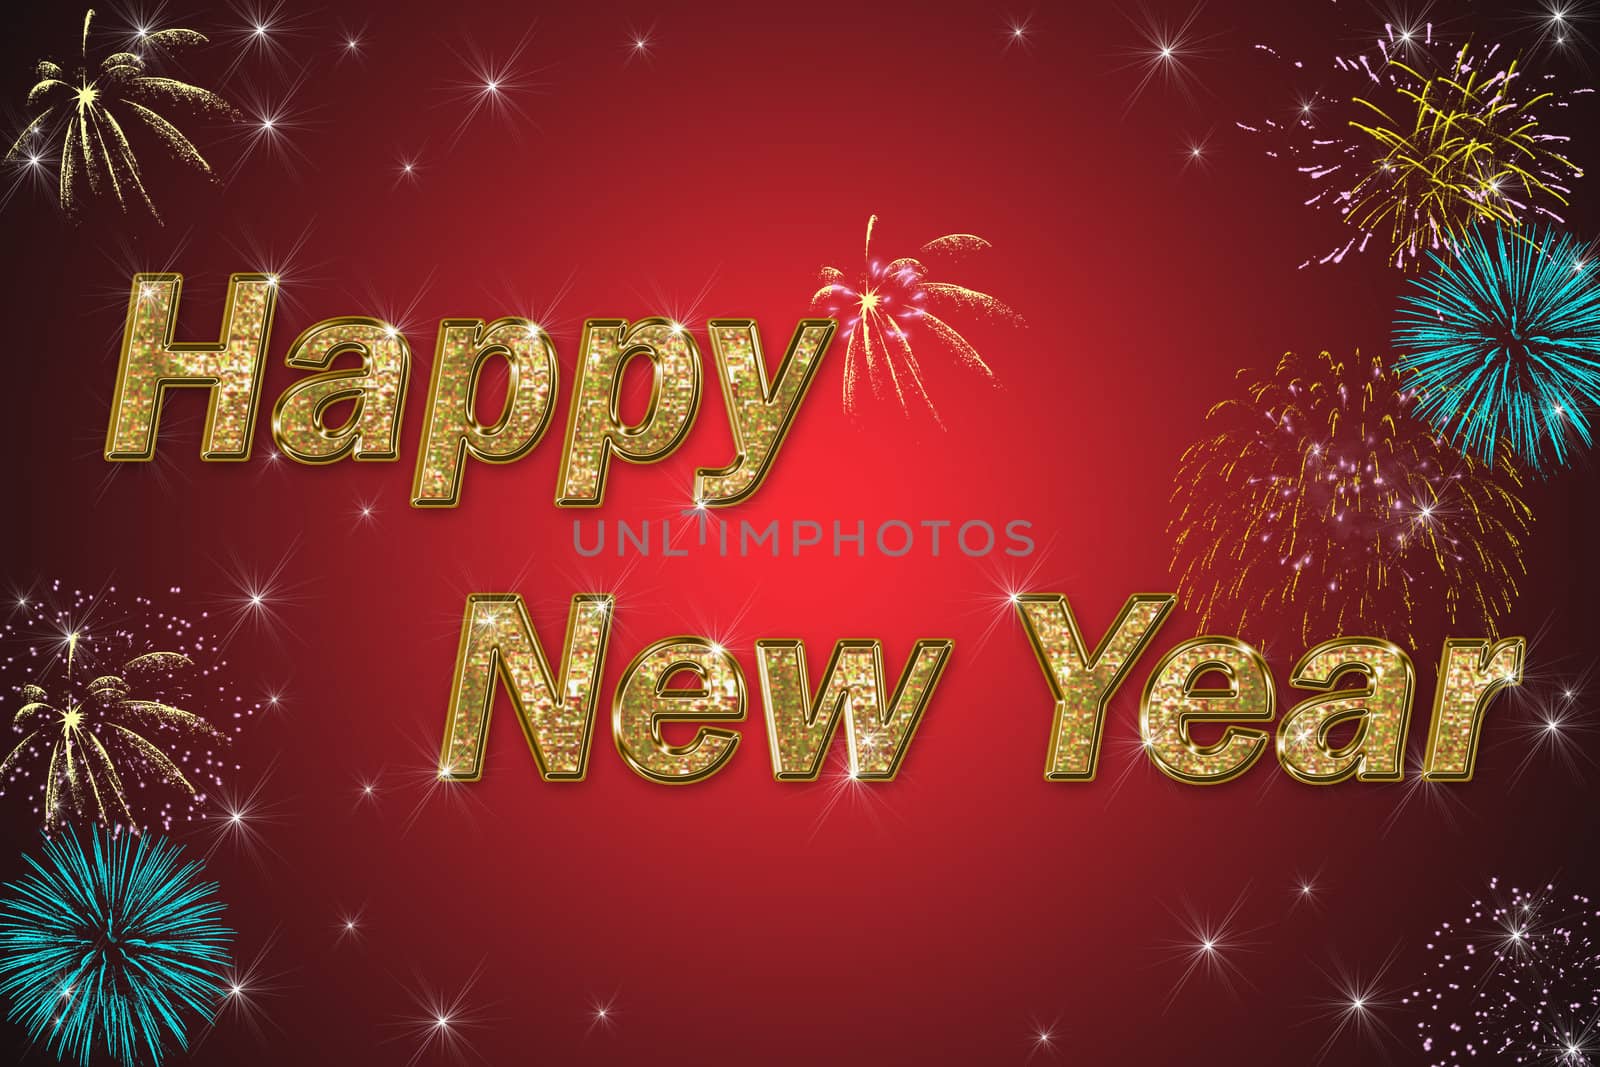 happy new year golden text on red background with stars